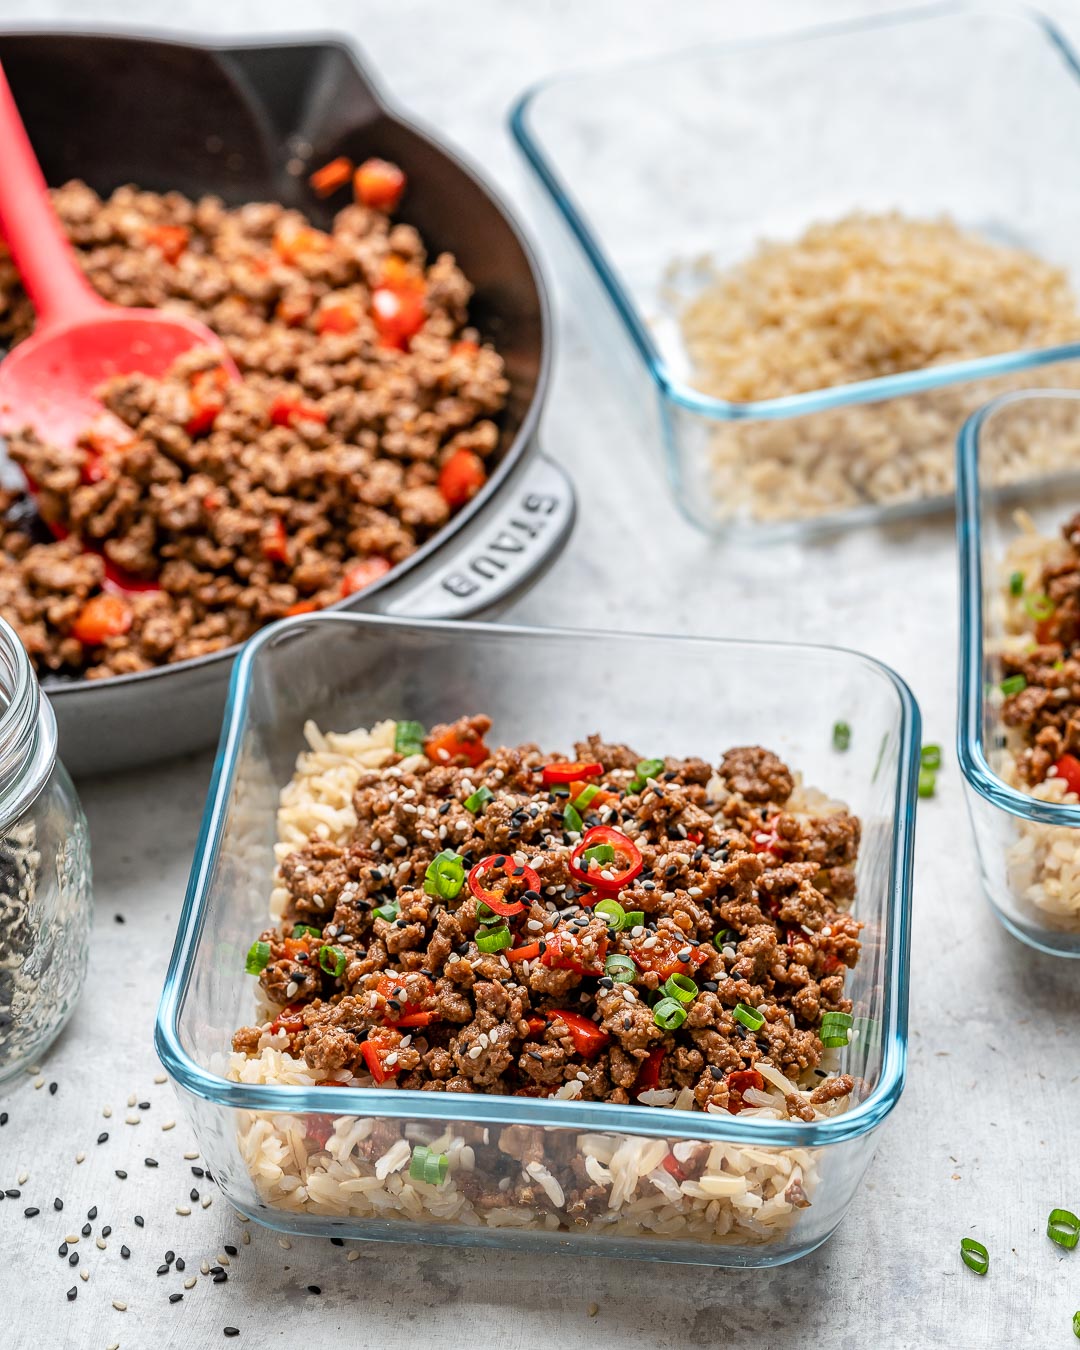 https://cleanfoodcrush.com/wp-content/uploads/2020/03/Asian-Style-Beef-Meal-Prep-Bowls-Recipe.jpg